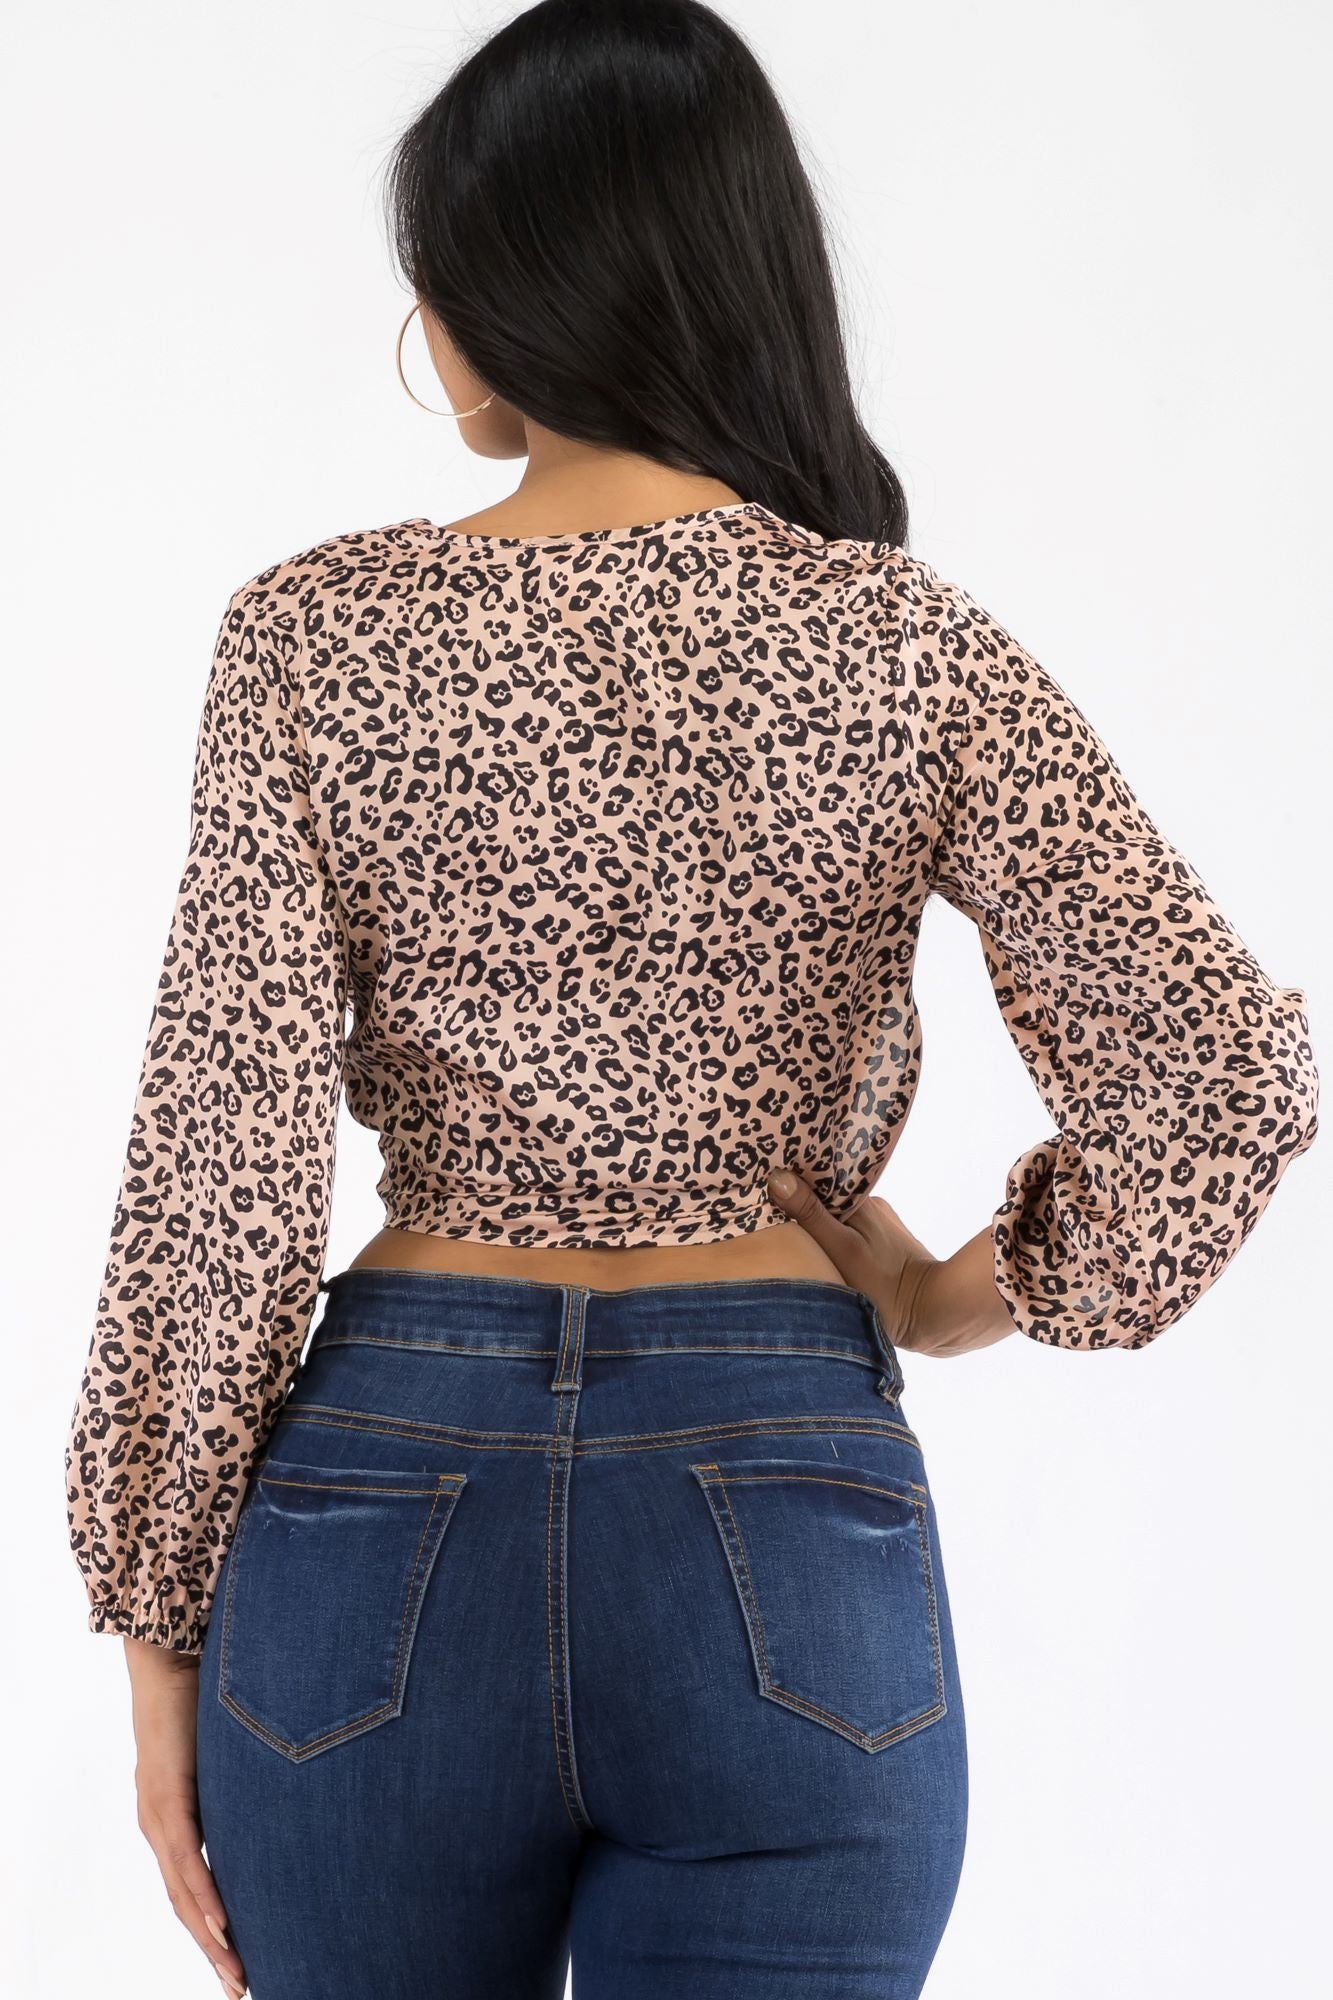 LST0006-CHE - CHEETAH PRINT LONG SLEEVE TWISTED FRONT TOP